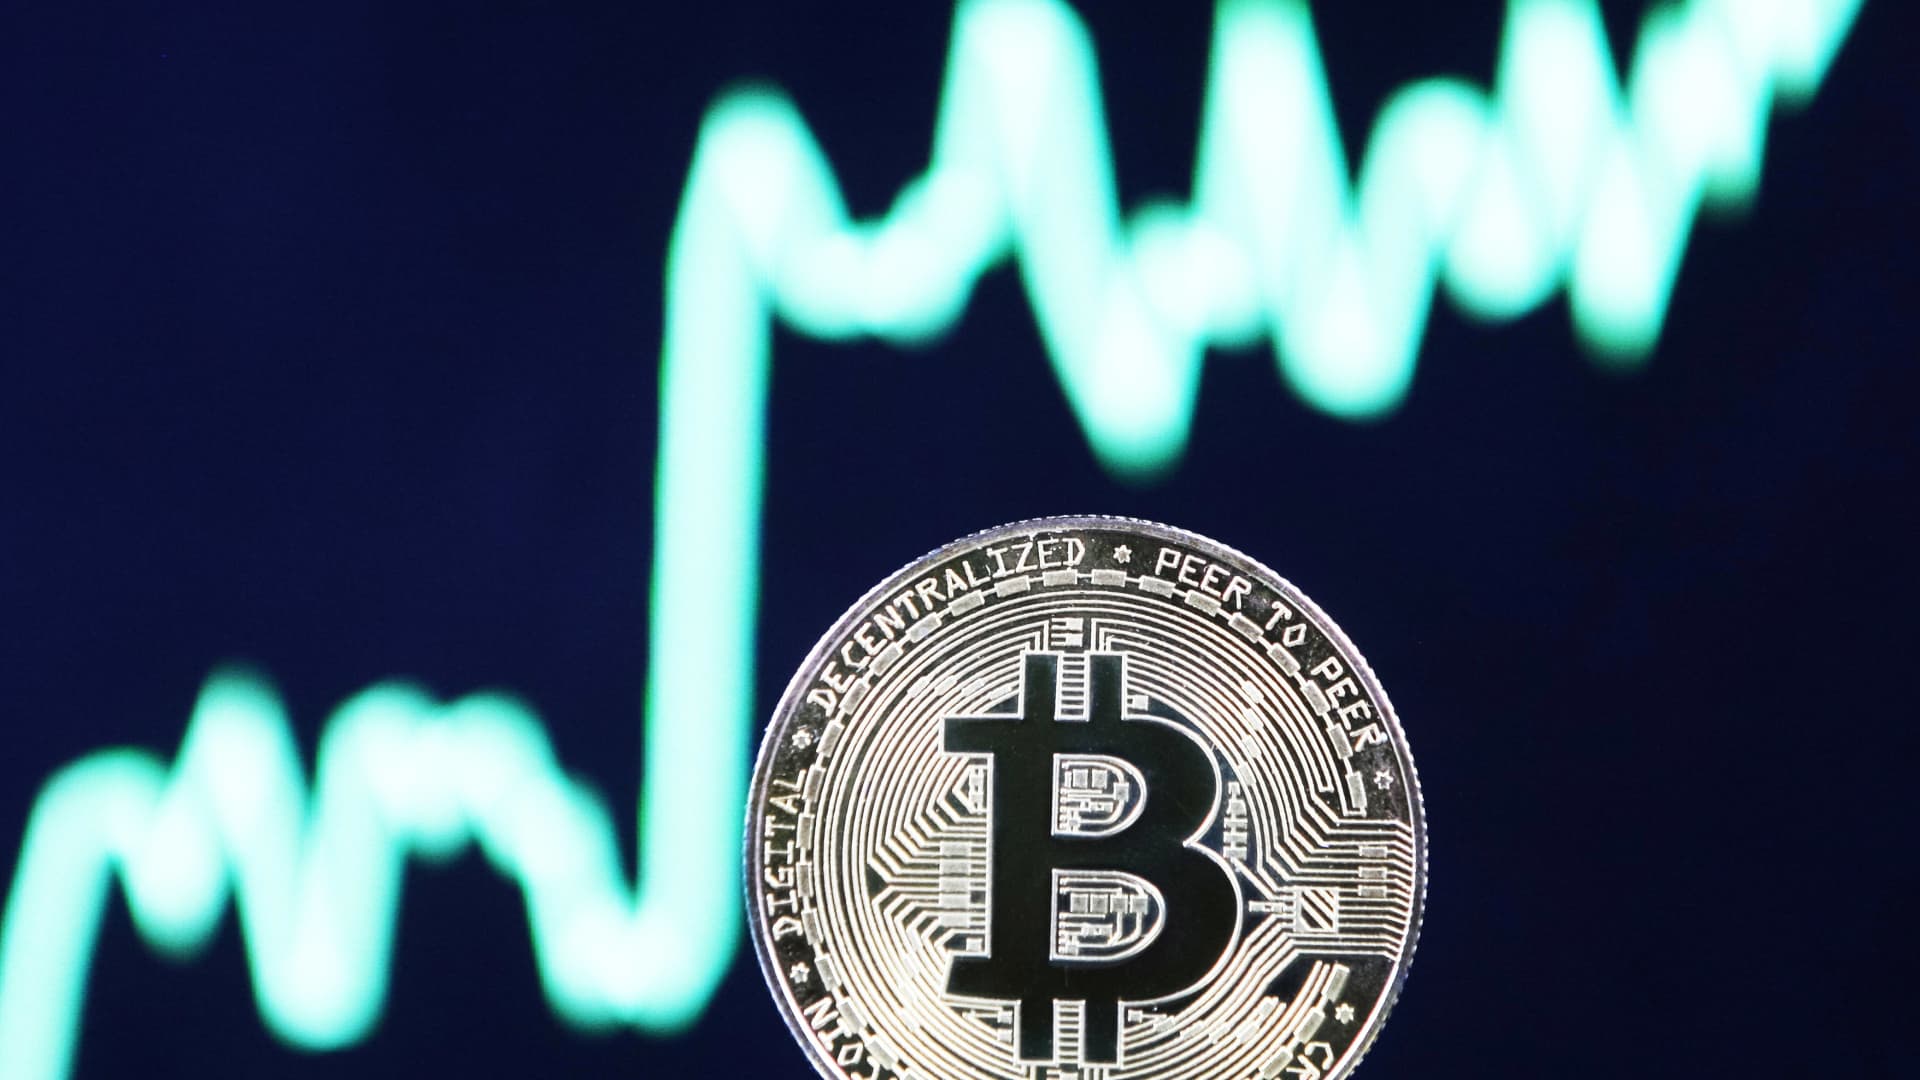 January was bitcoin's best month since 2021, but crypto isn't ready for a 'rocket ship rally' yet